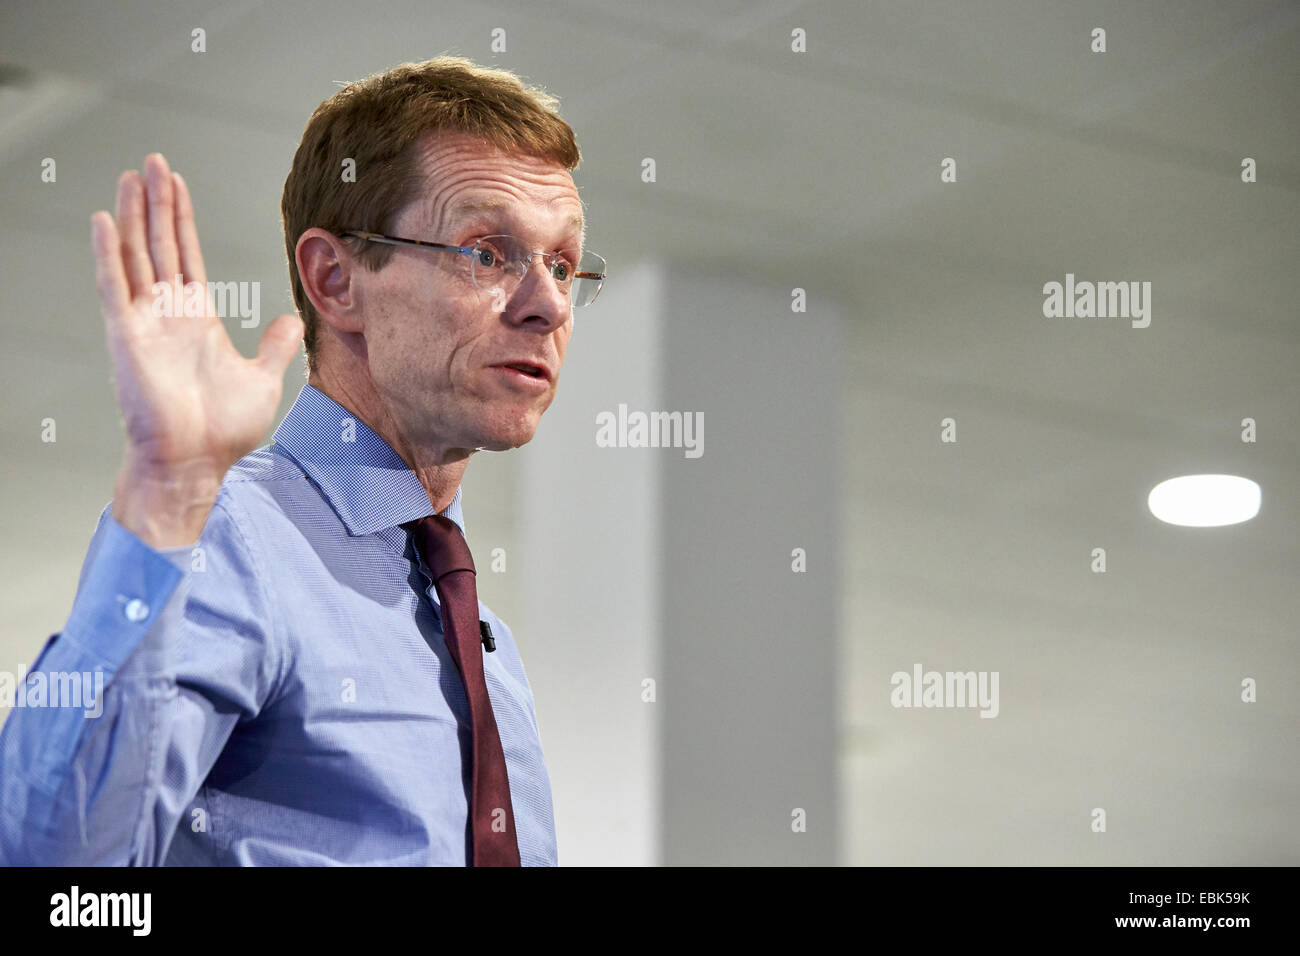 Andy Street Managing Director, John Lewis pictured during a conference in Birmingham, UK Stock Photo